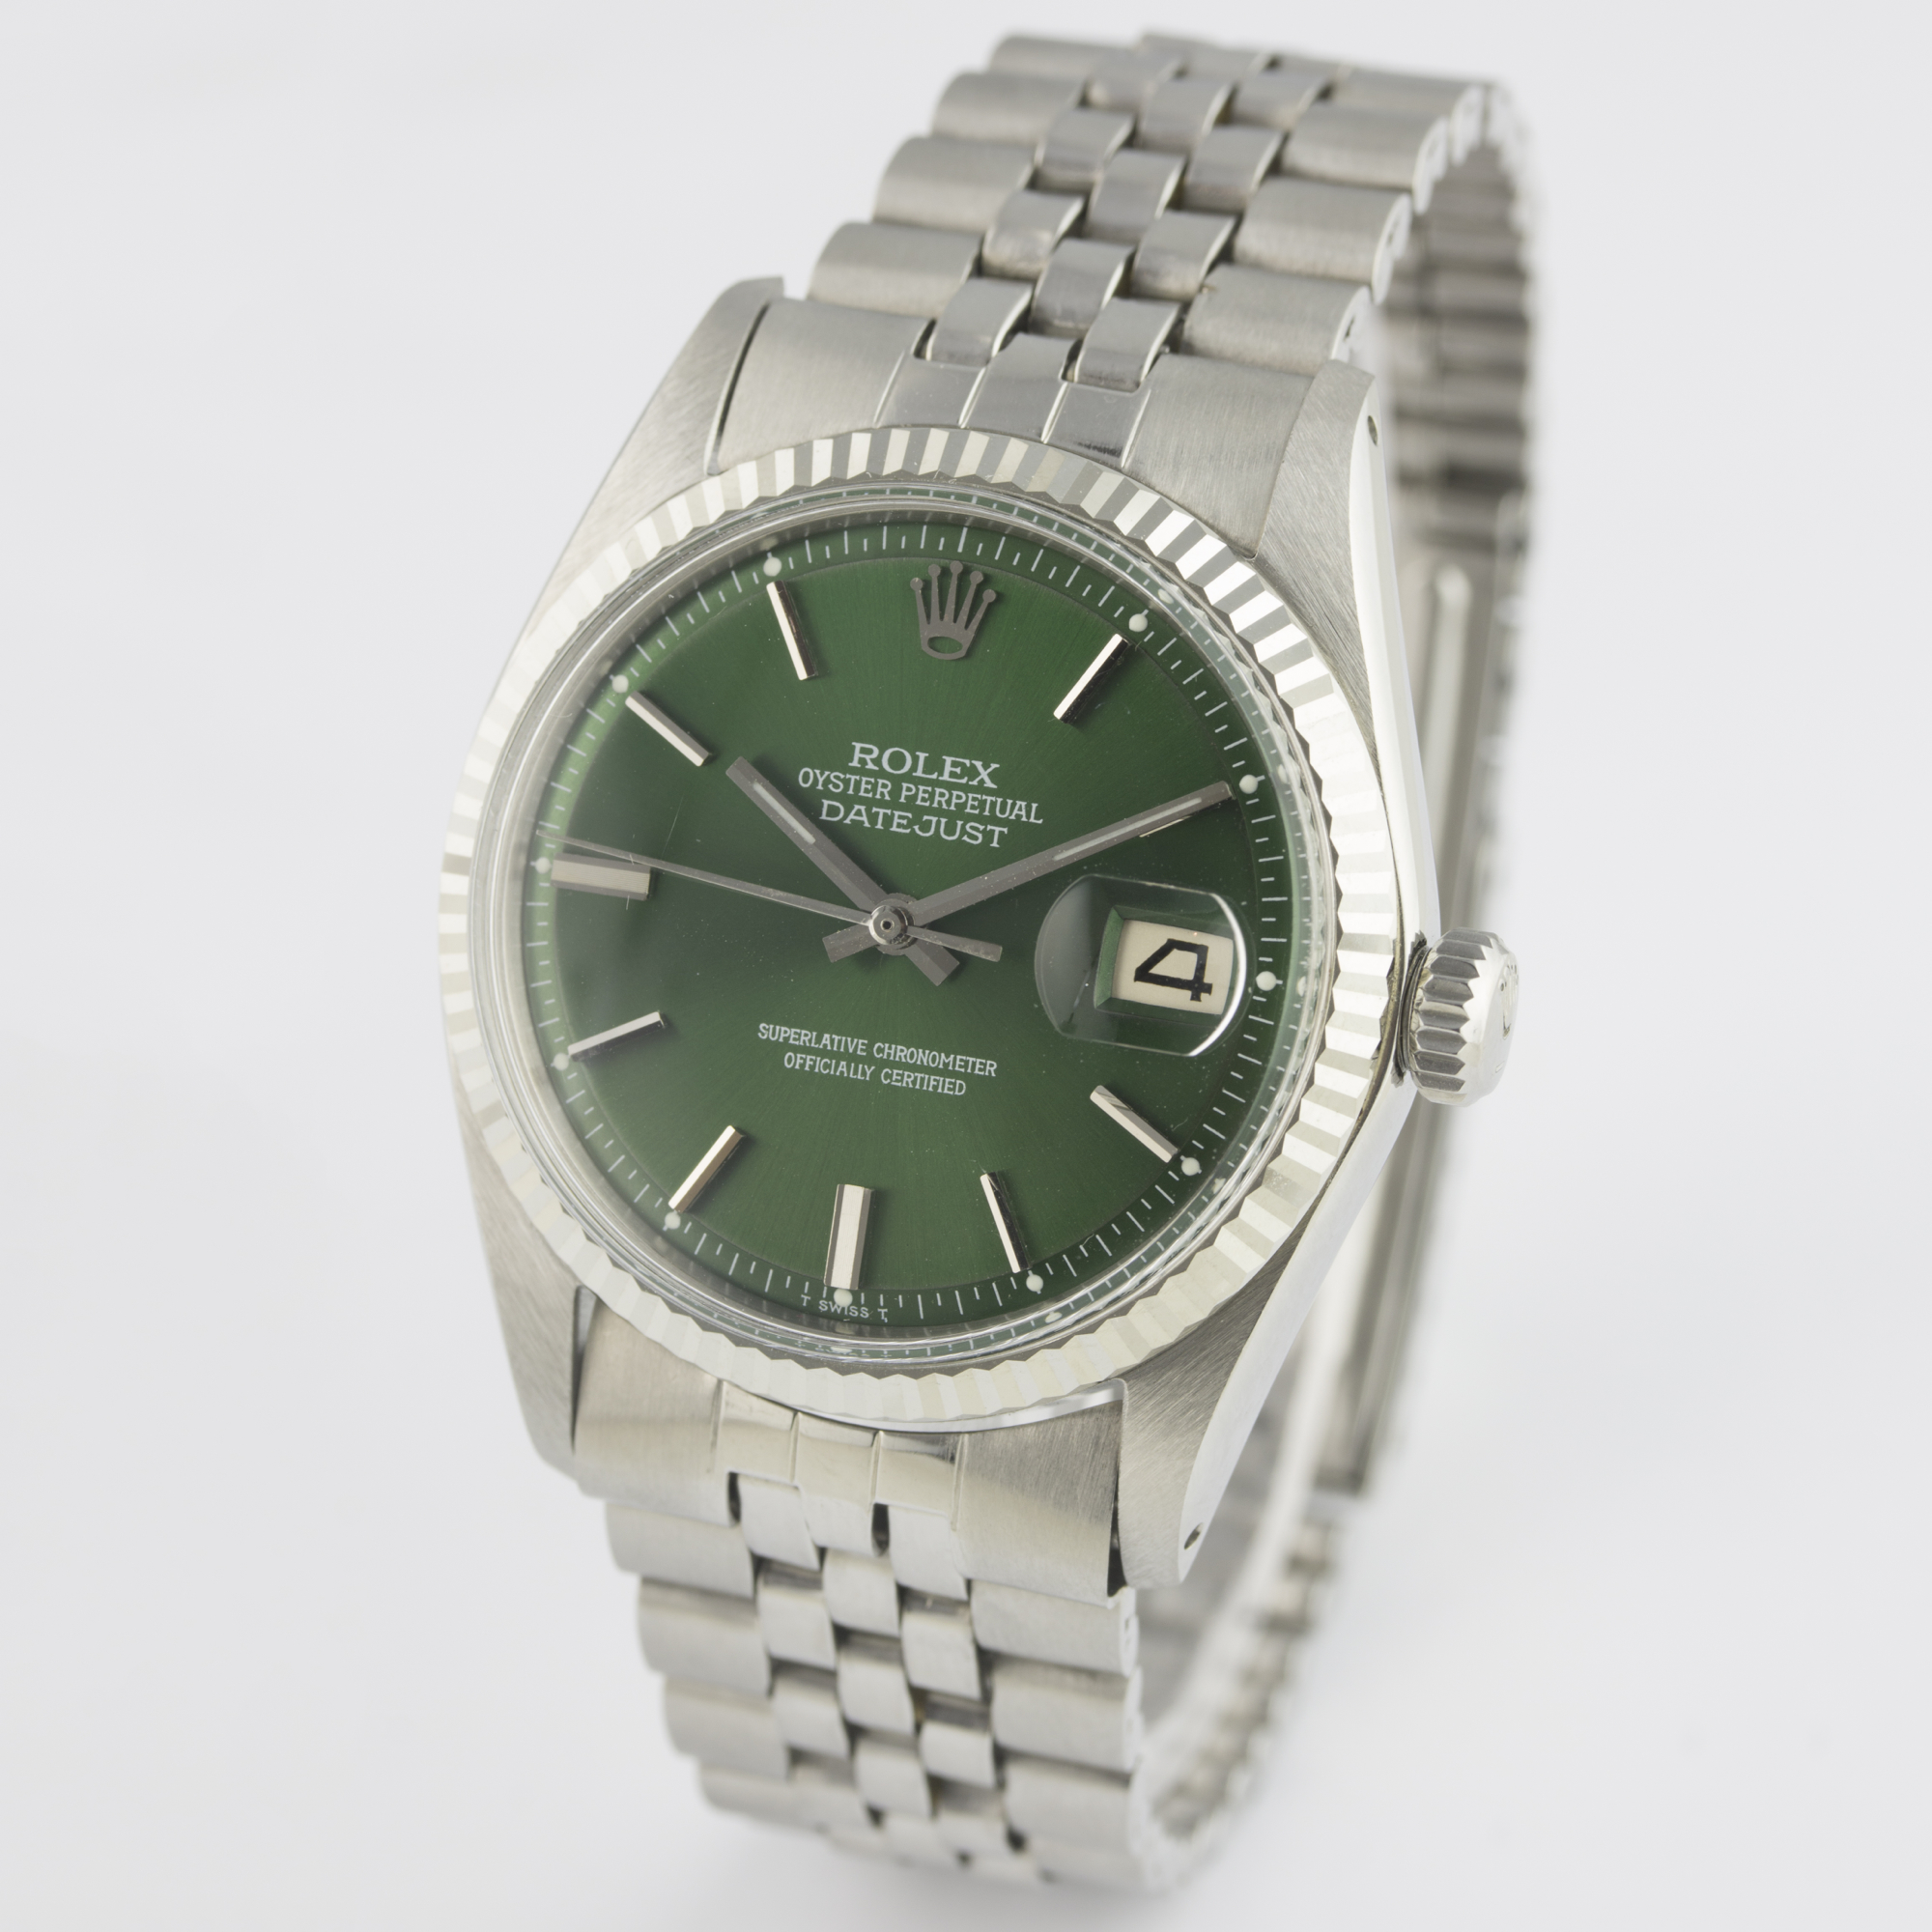 A GENTLEMAN'S STAINLESS STEEL & WHITE GOLD ROLEX OYSTER PERPETUAL DATEJUST BRACELET WATCH CIRCA - Image 4 of 10